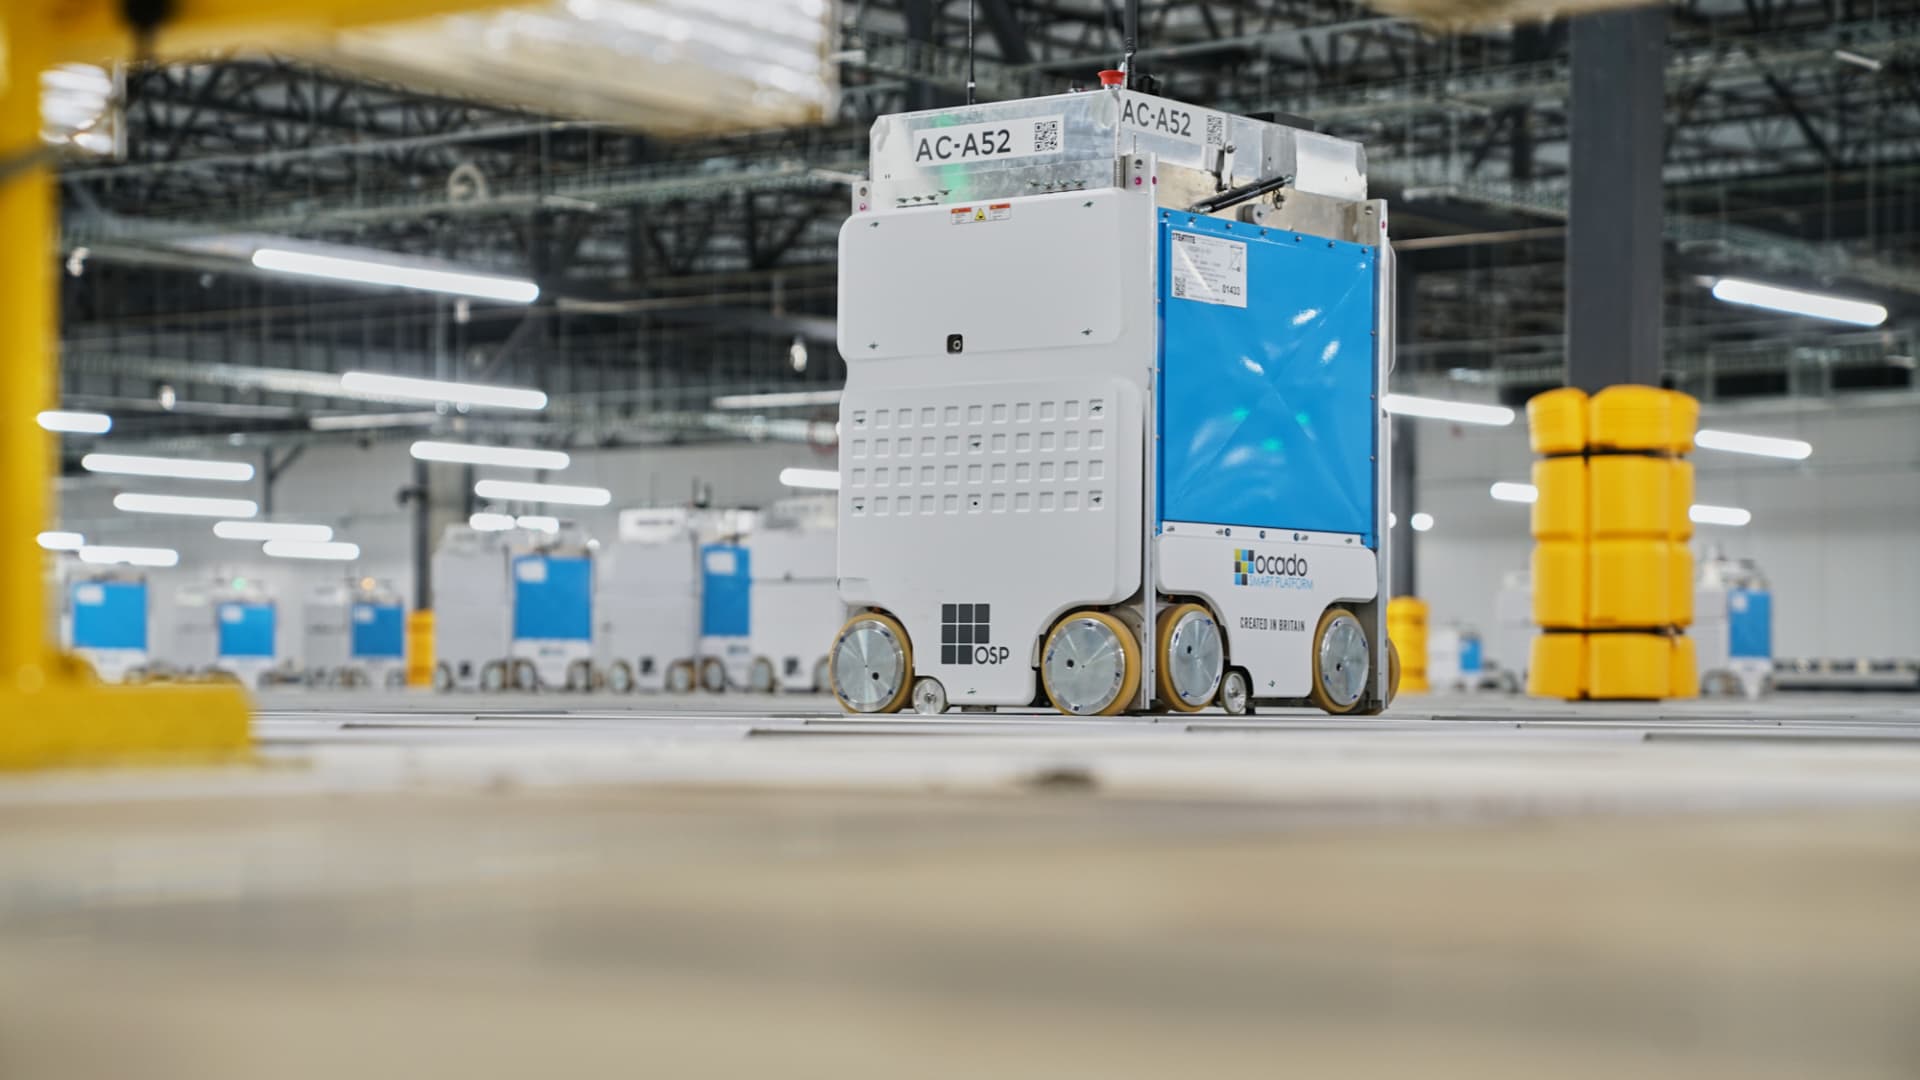 Robots glide on top of a grid and help retrieve groceries in Kroger's automated warehouses. The robots are powered by software from U.K.-based Ocado.